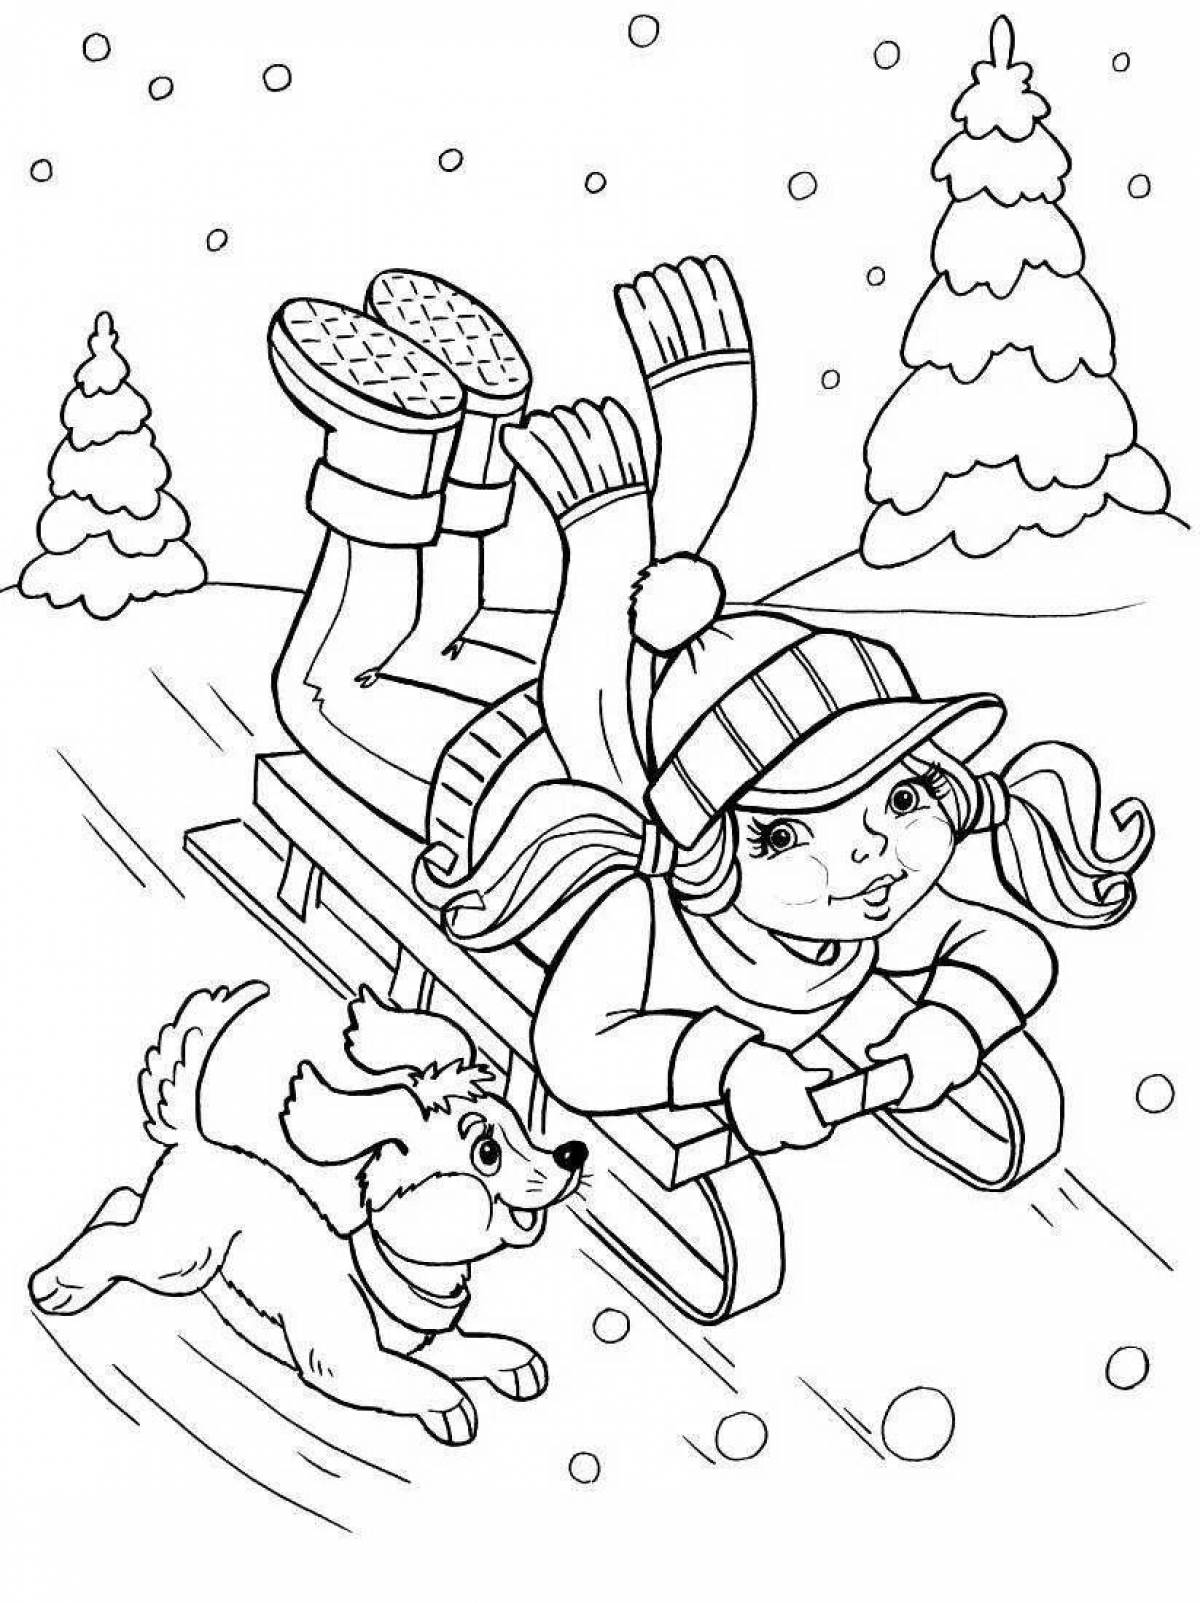 Glorious coloring book winter fun for kids 5 years old